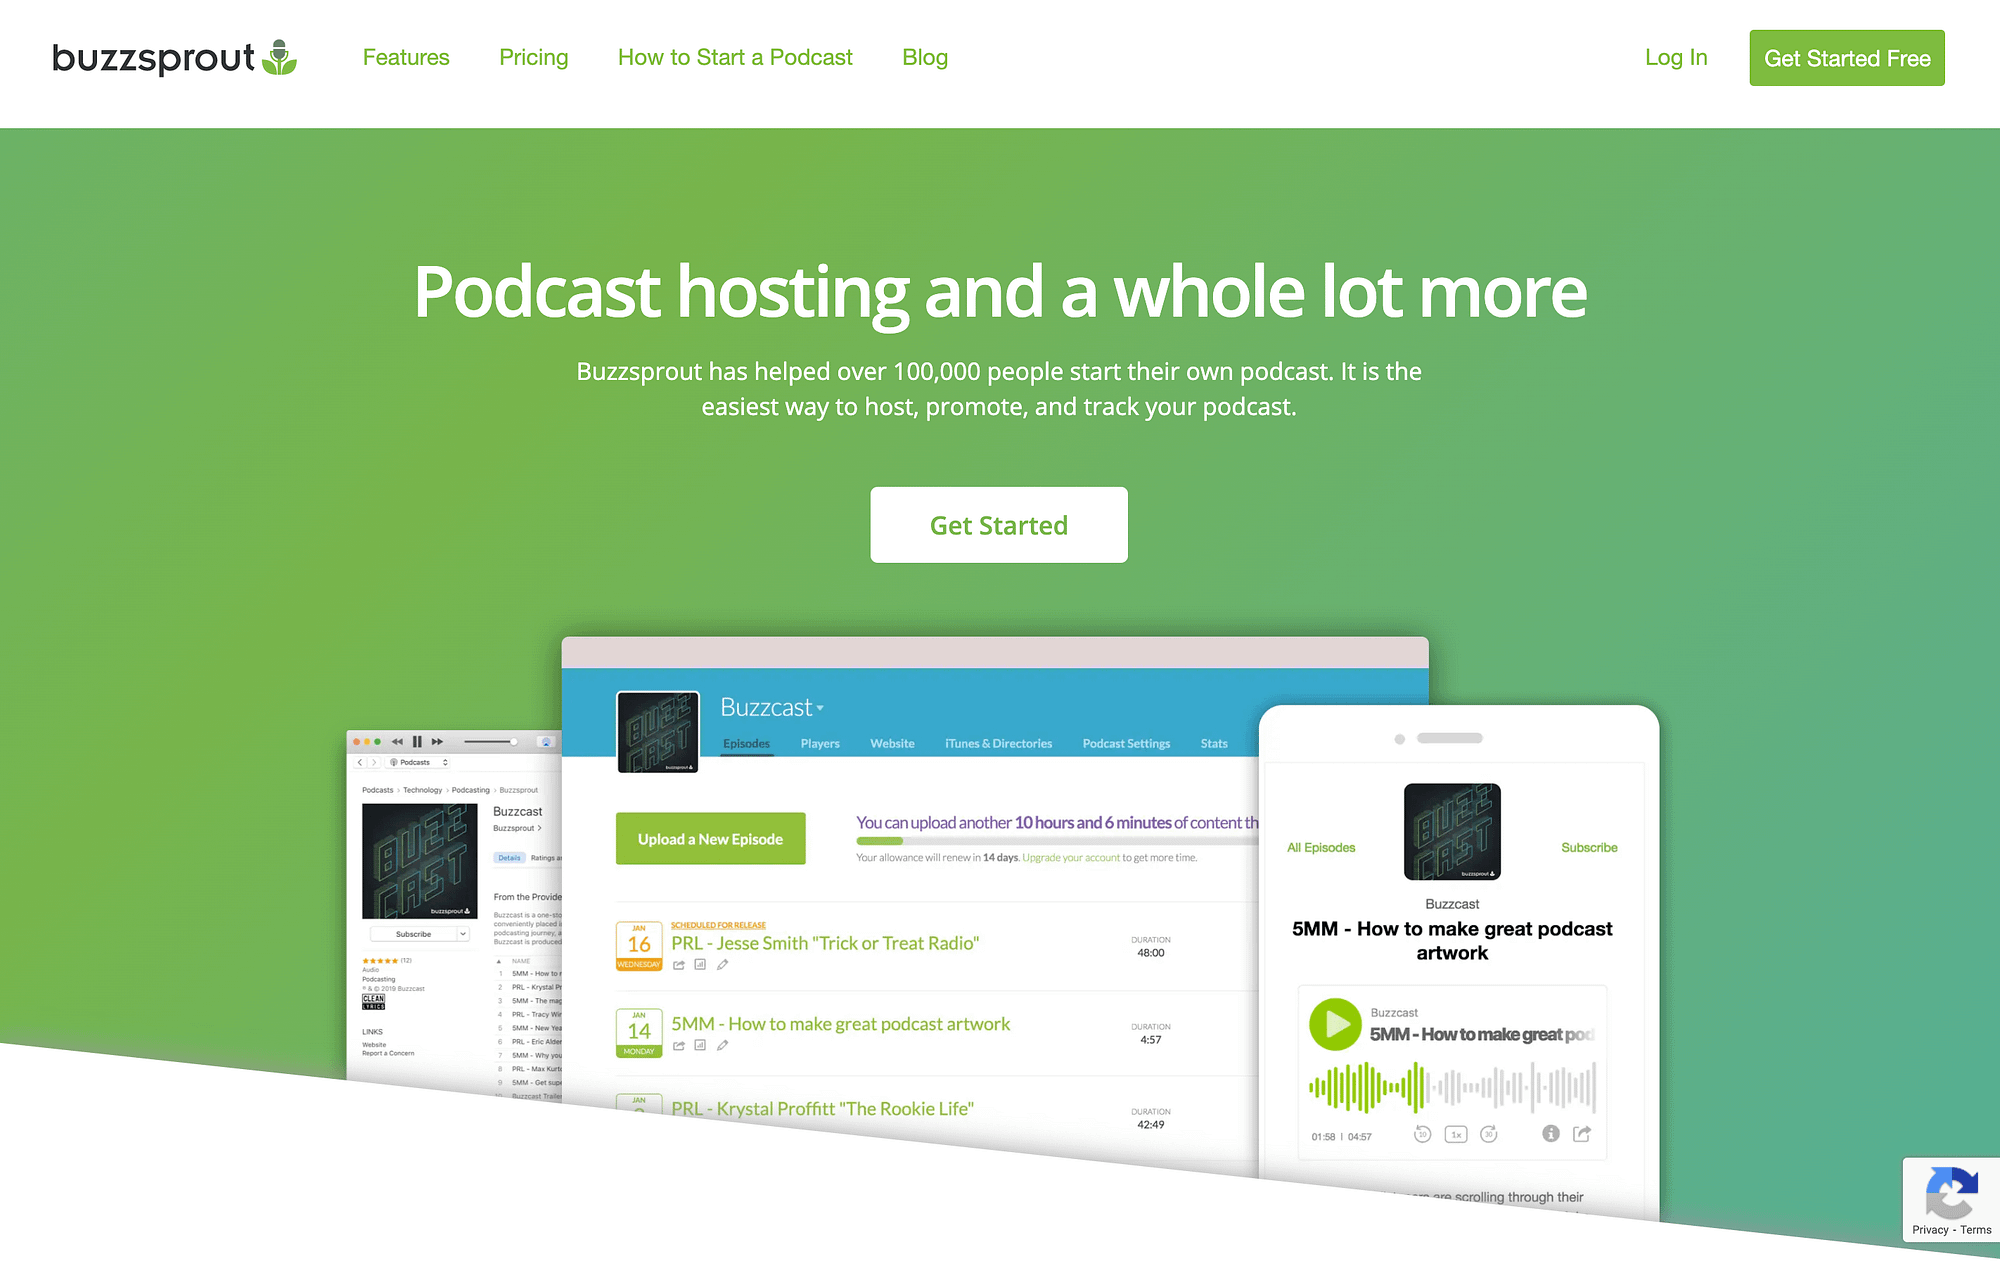 Buzzsprout is one of the most well known free podcast hosting options